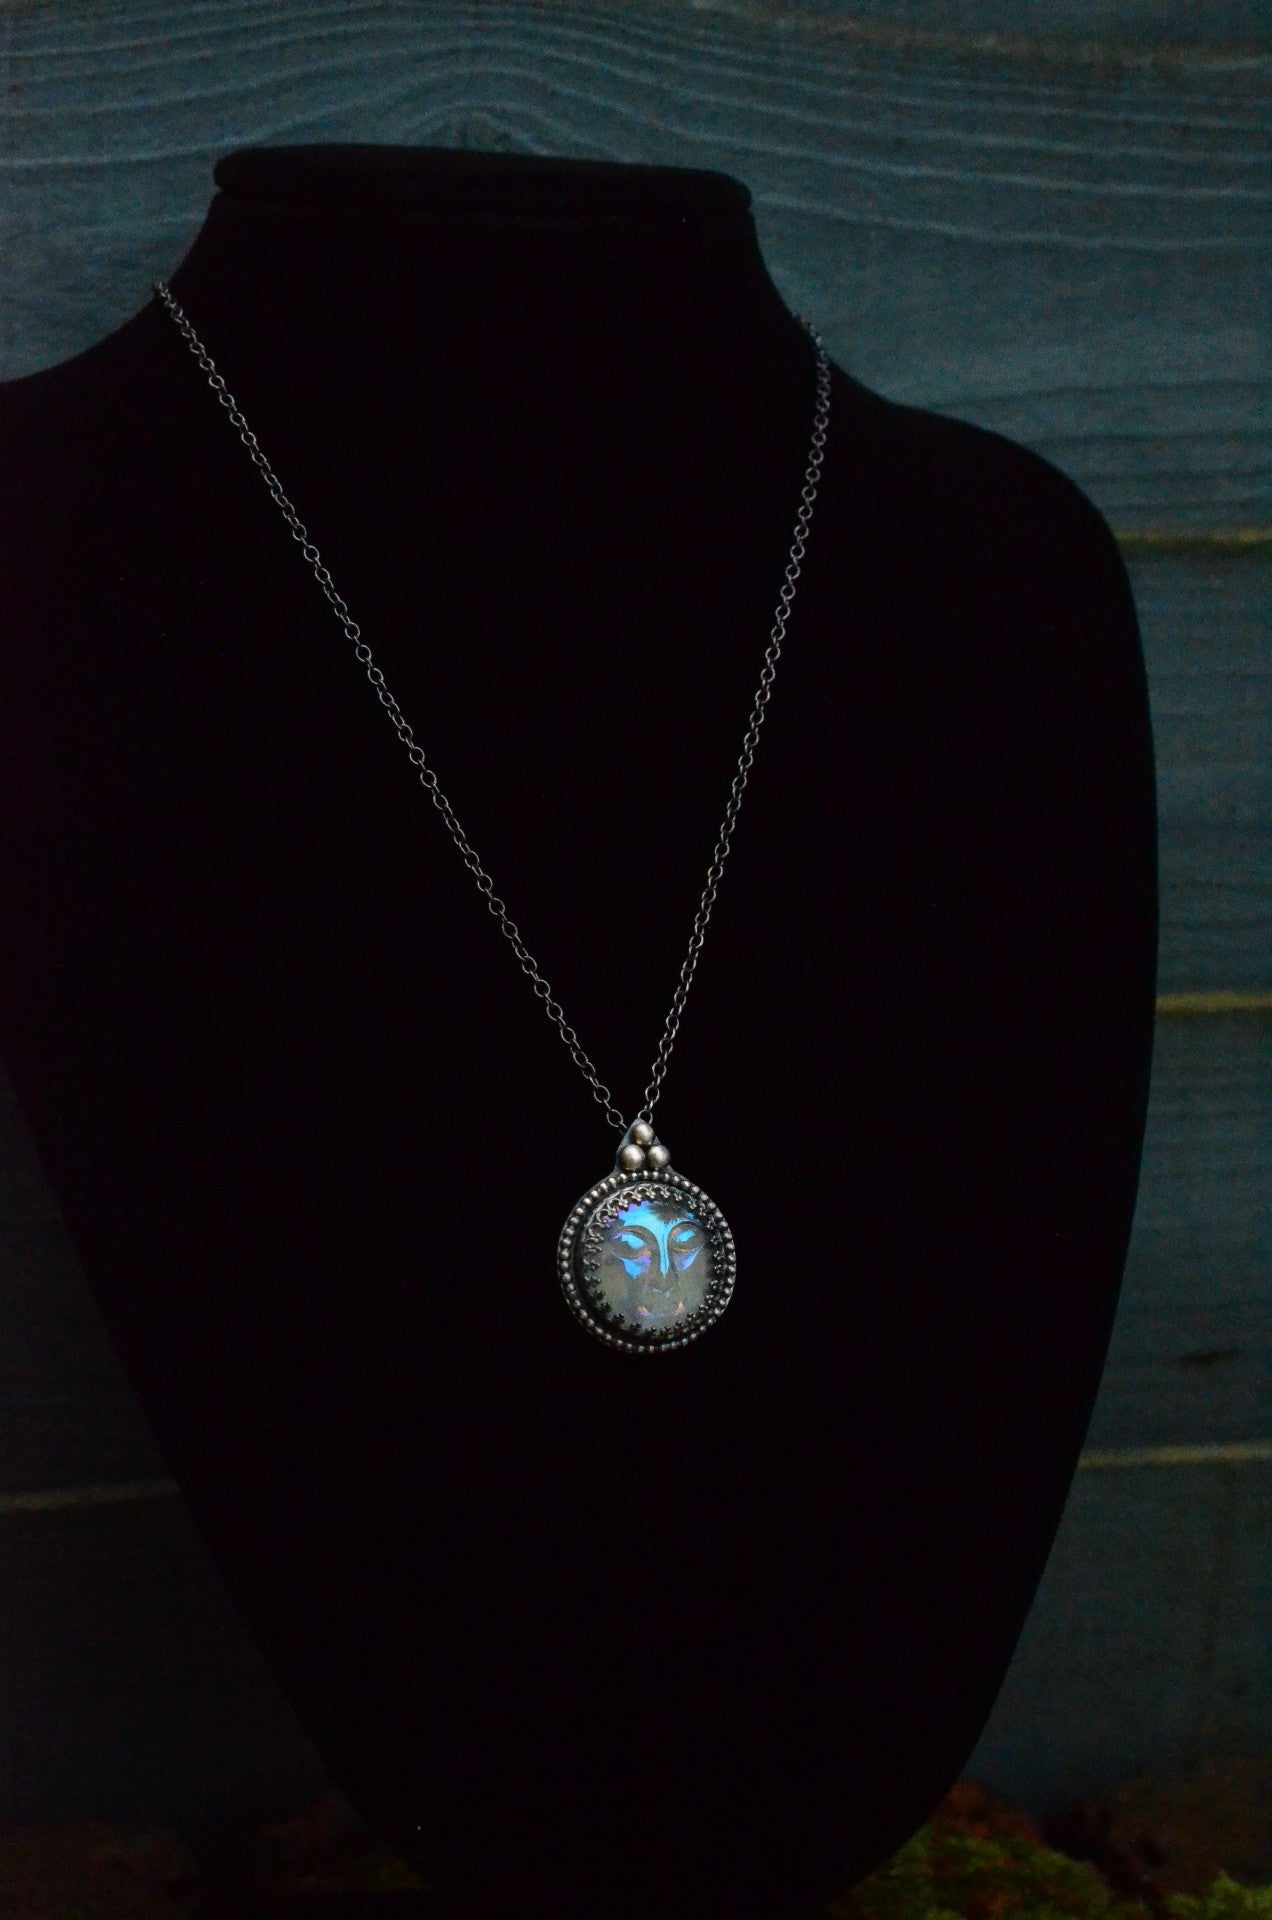 Full Moon Sterling Silver Necklace